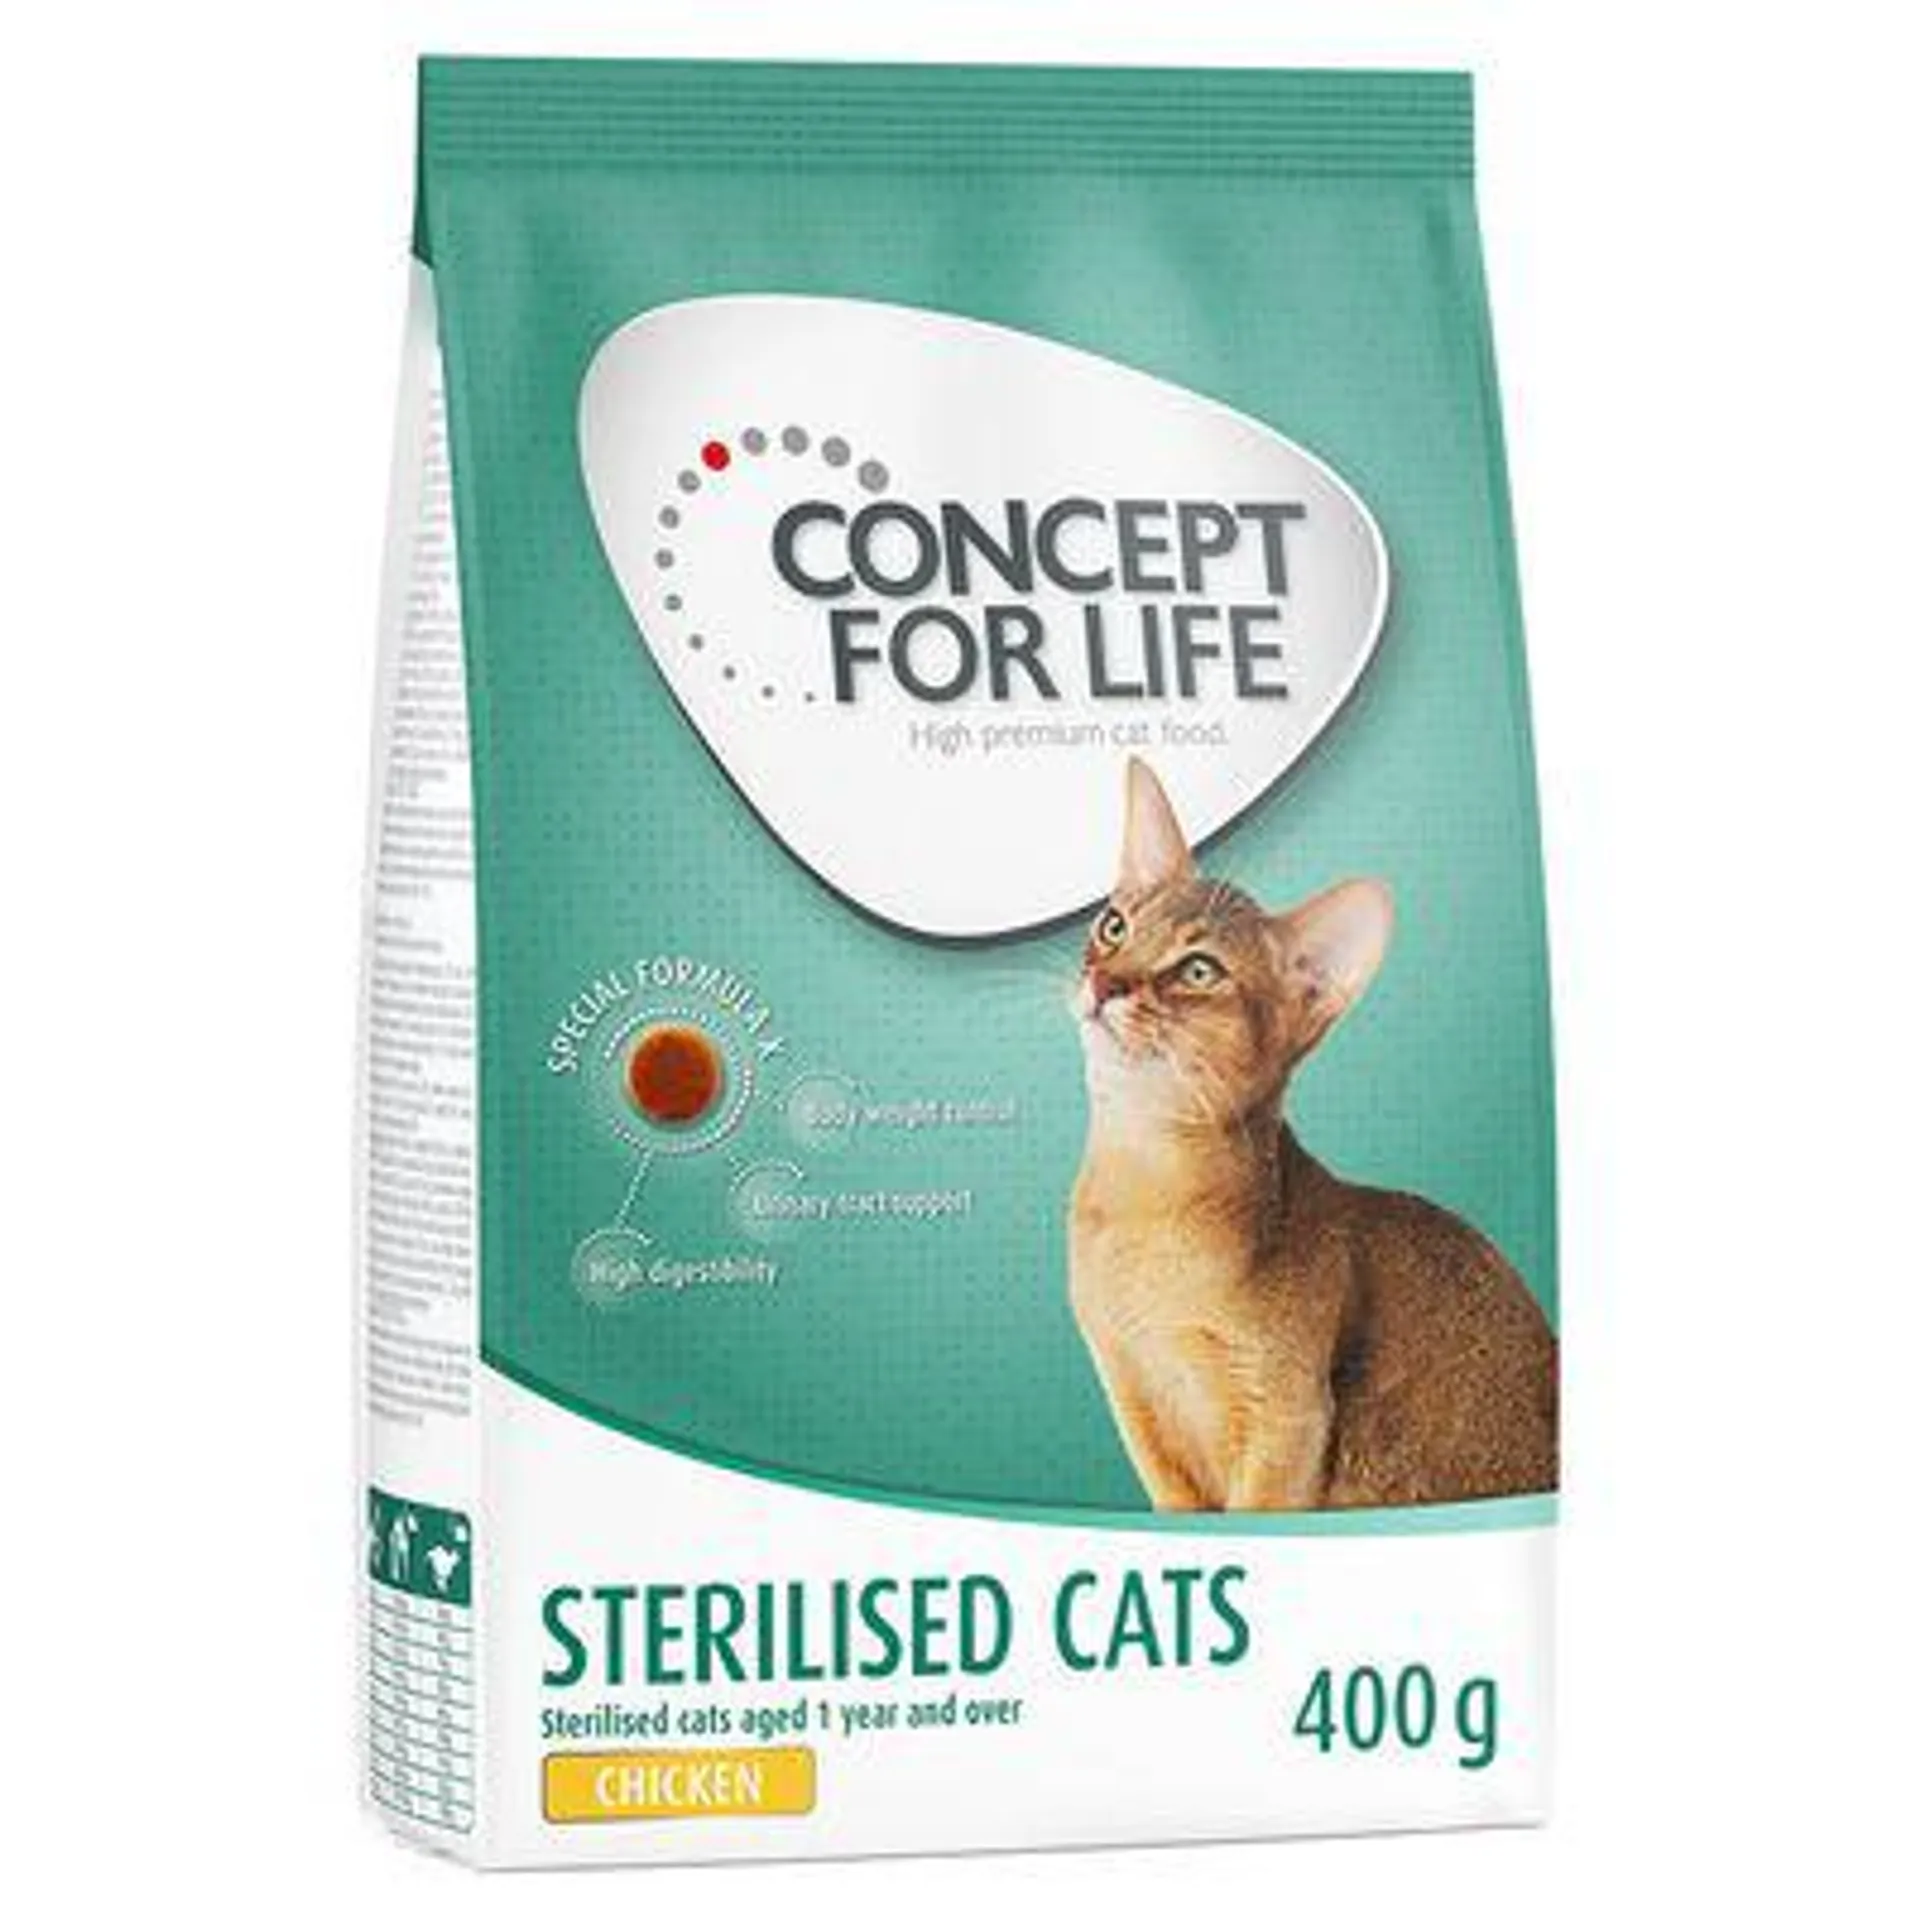 400g Concept for Life Adult/Kitten Dry Cat Food - Special Price!*